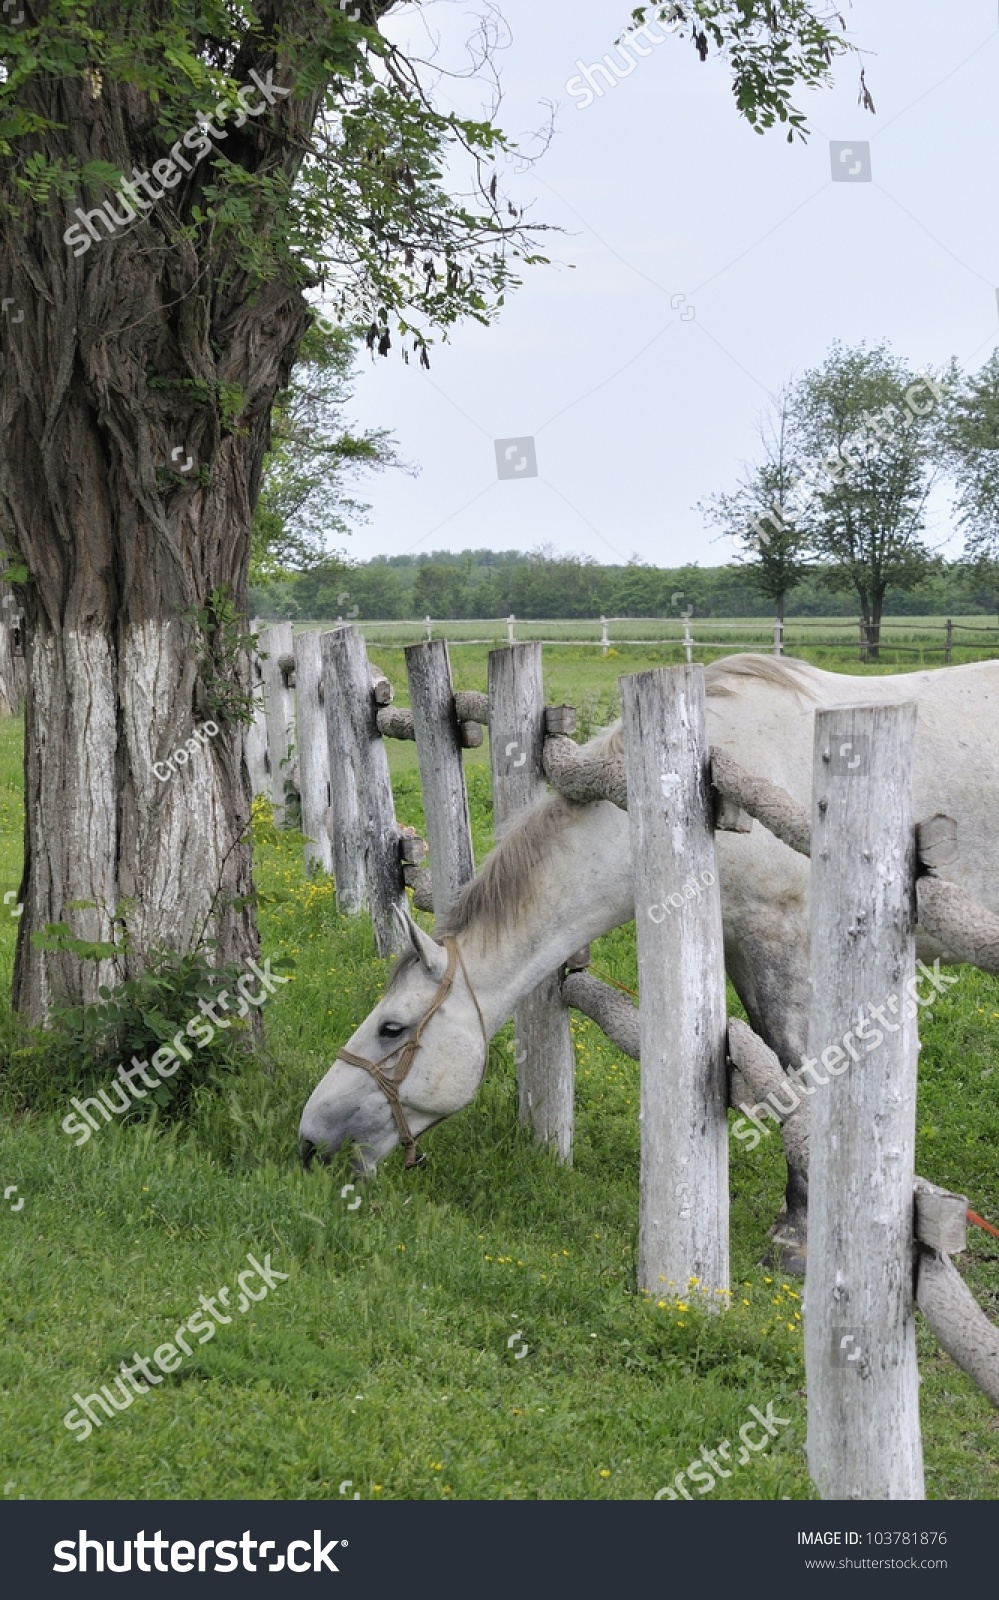 Lipizzaner horse shoved head through the wooden fence and graze #103781876